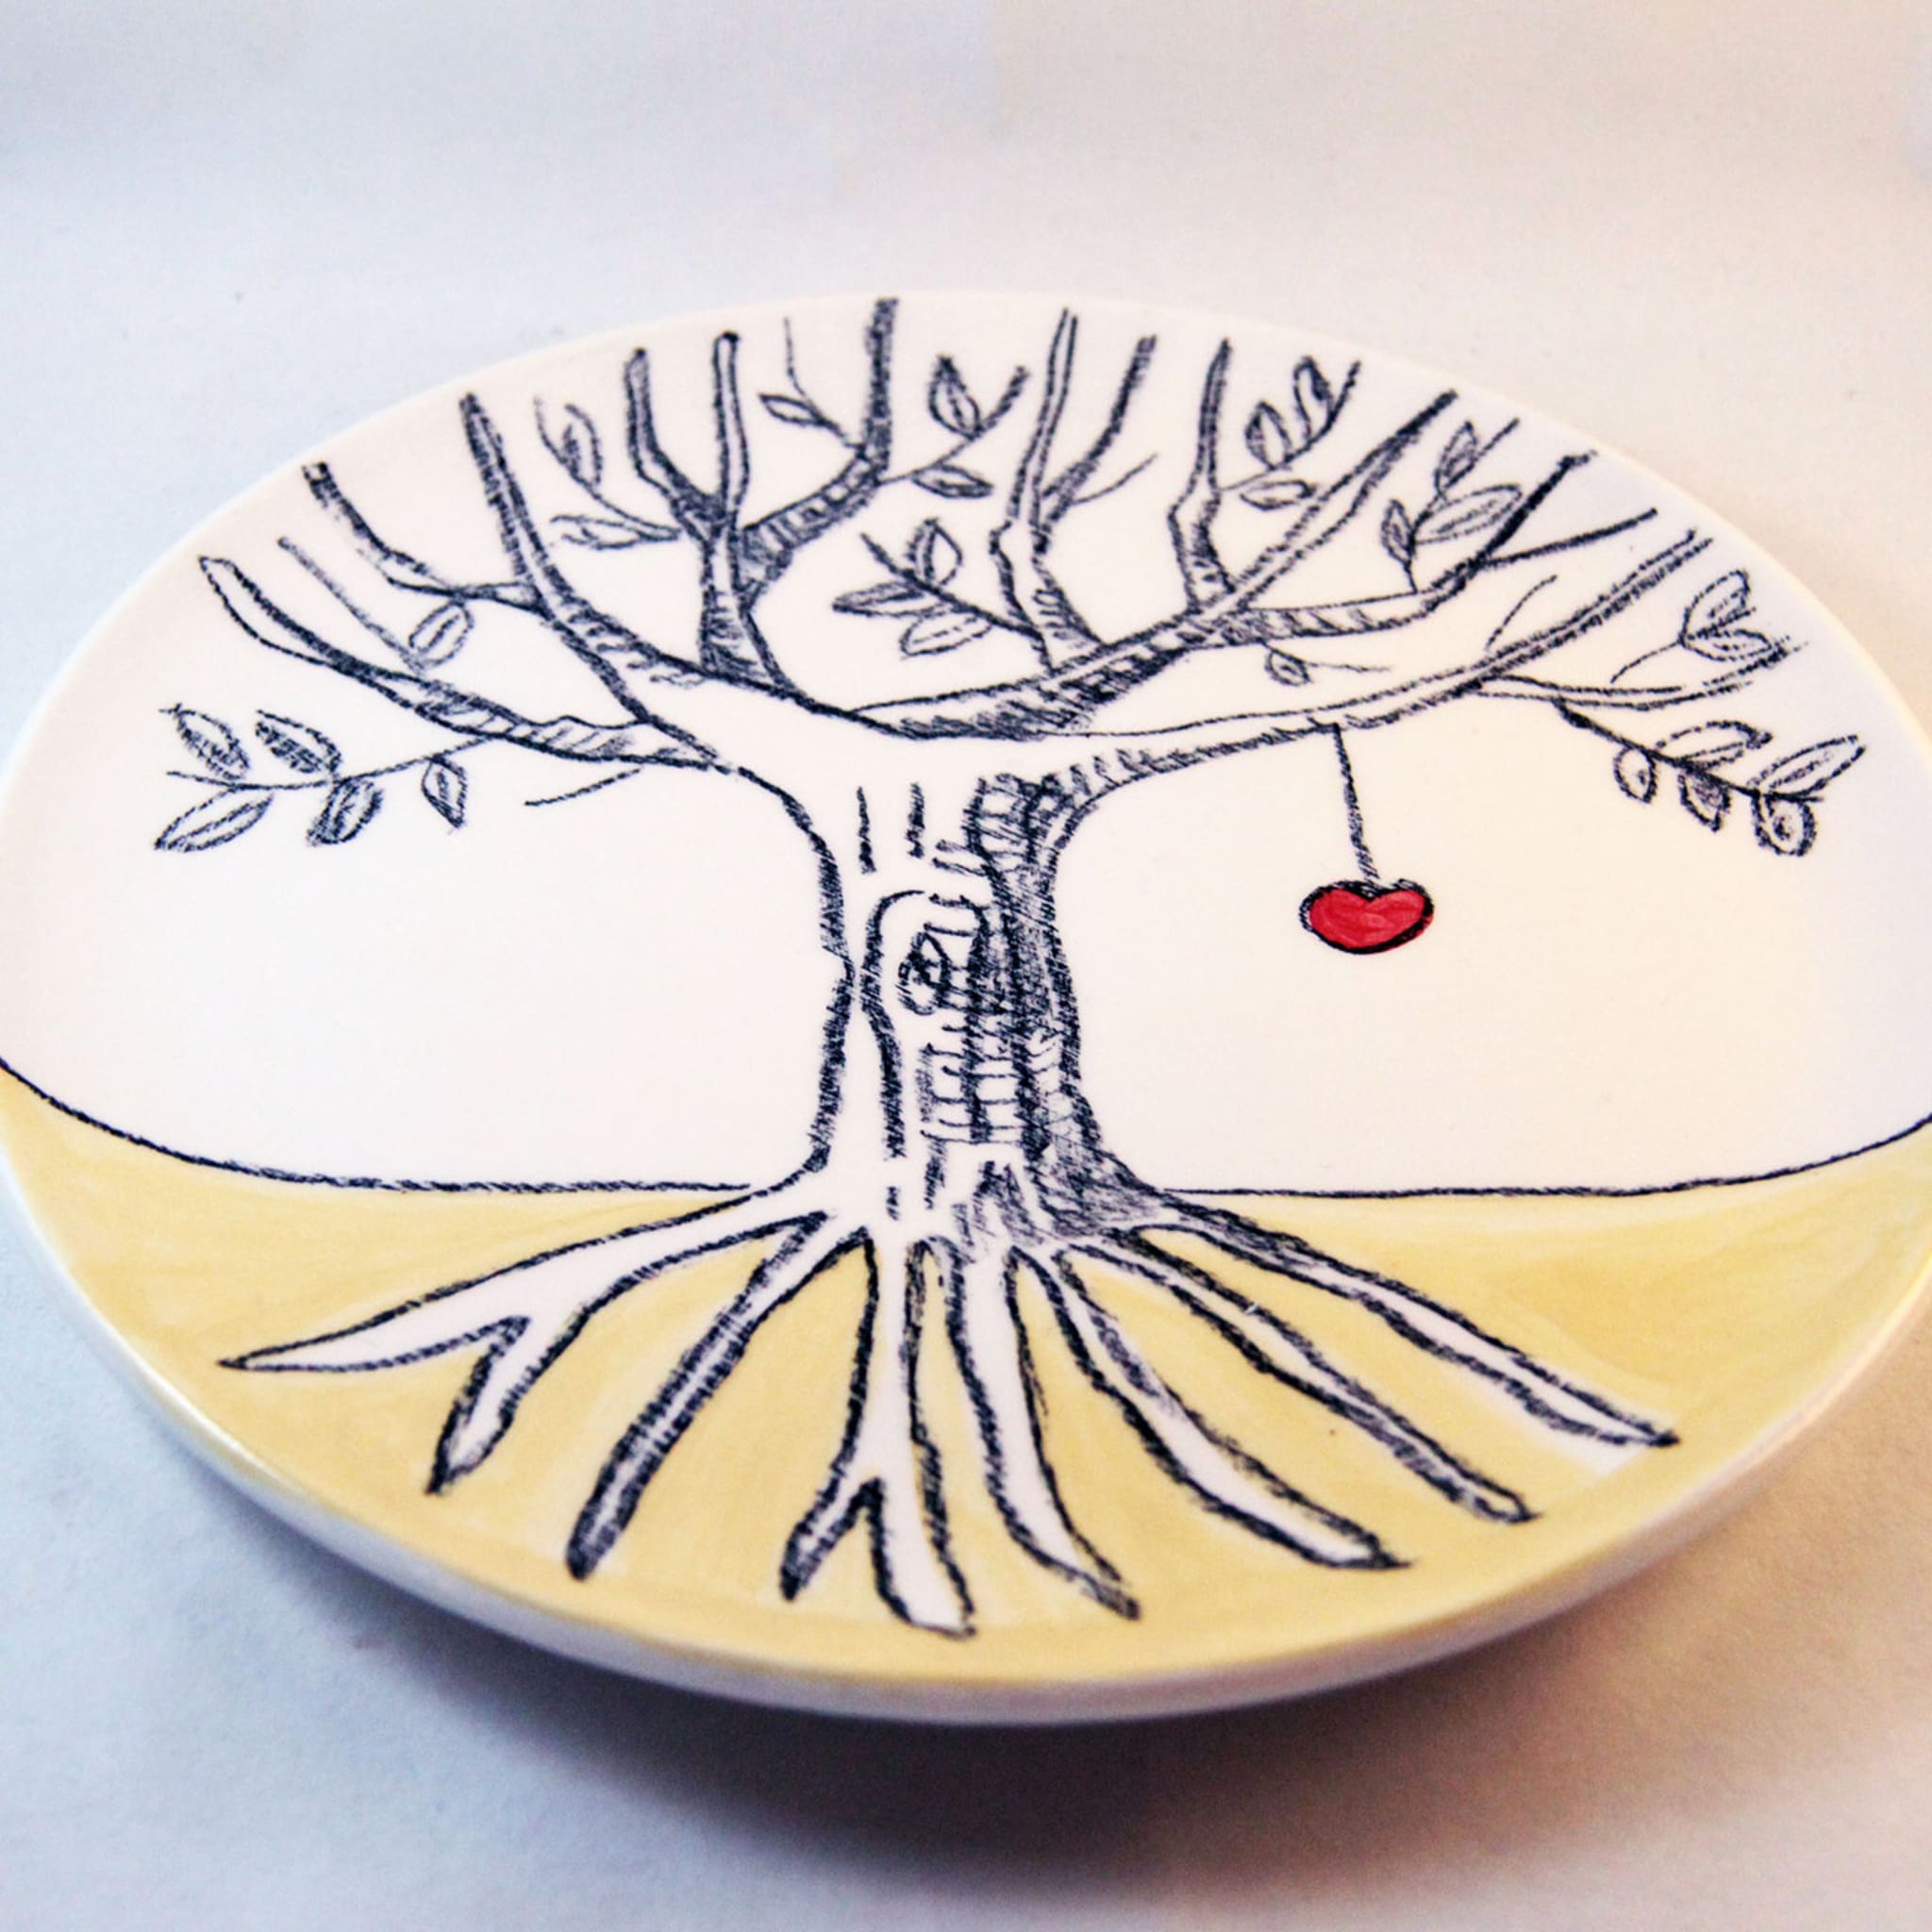 Tree and Roots Decorative Plate - Alternative view 2